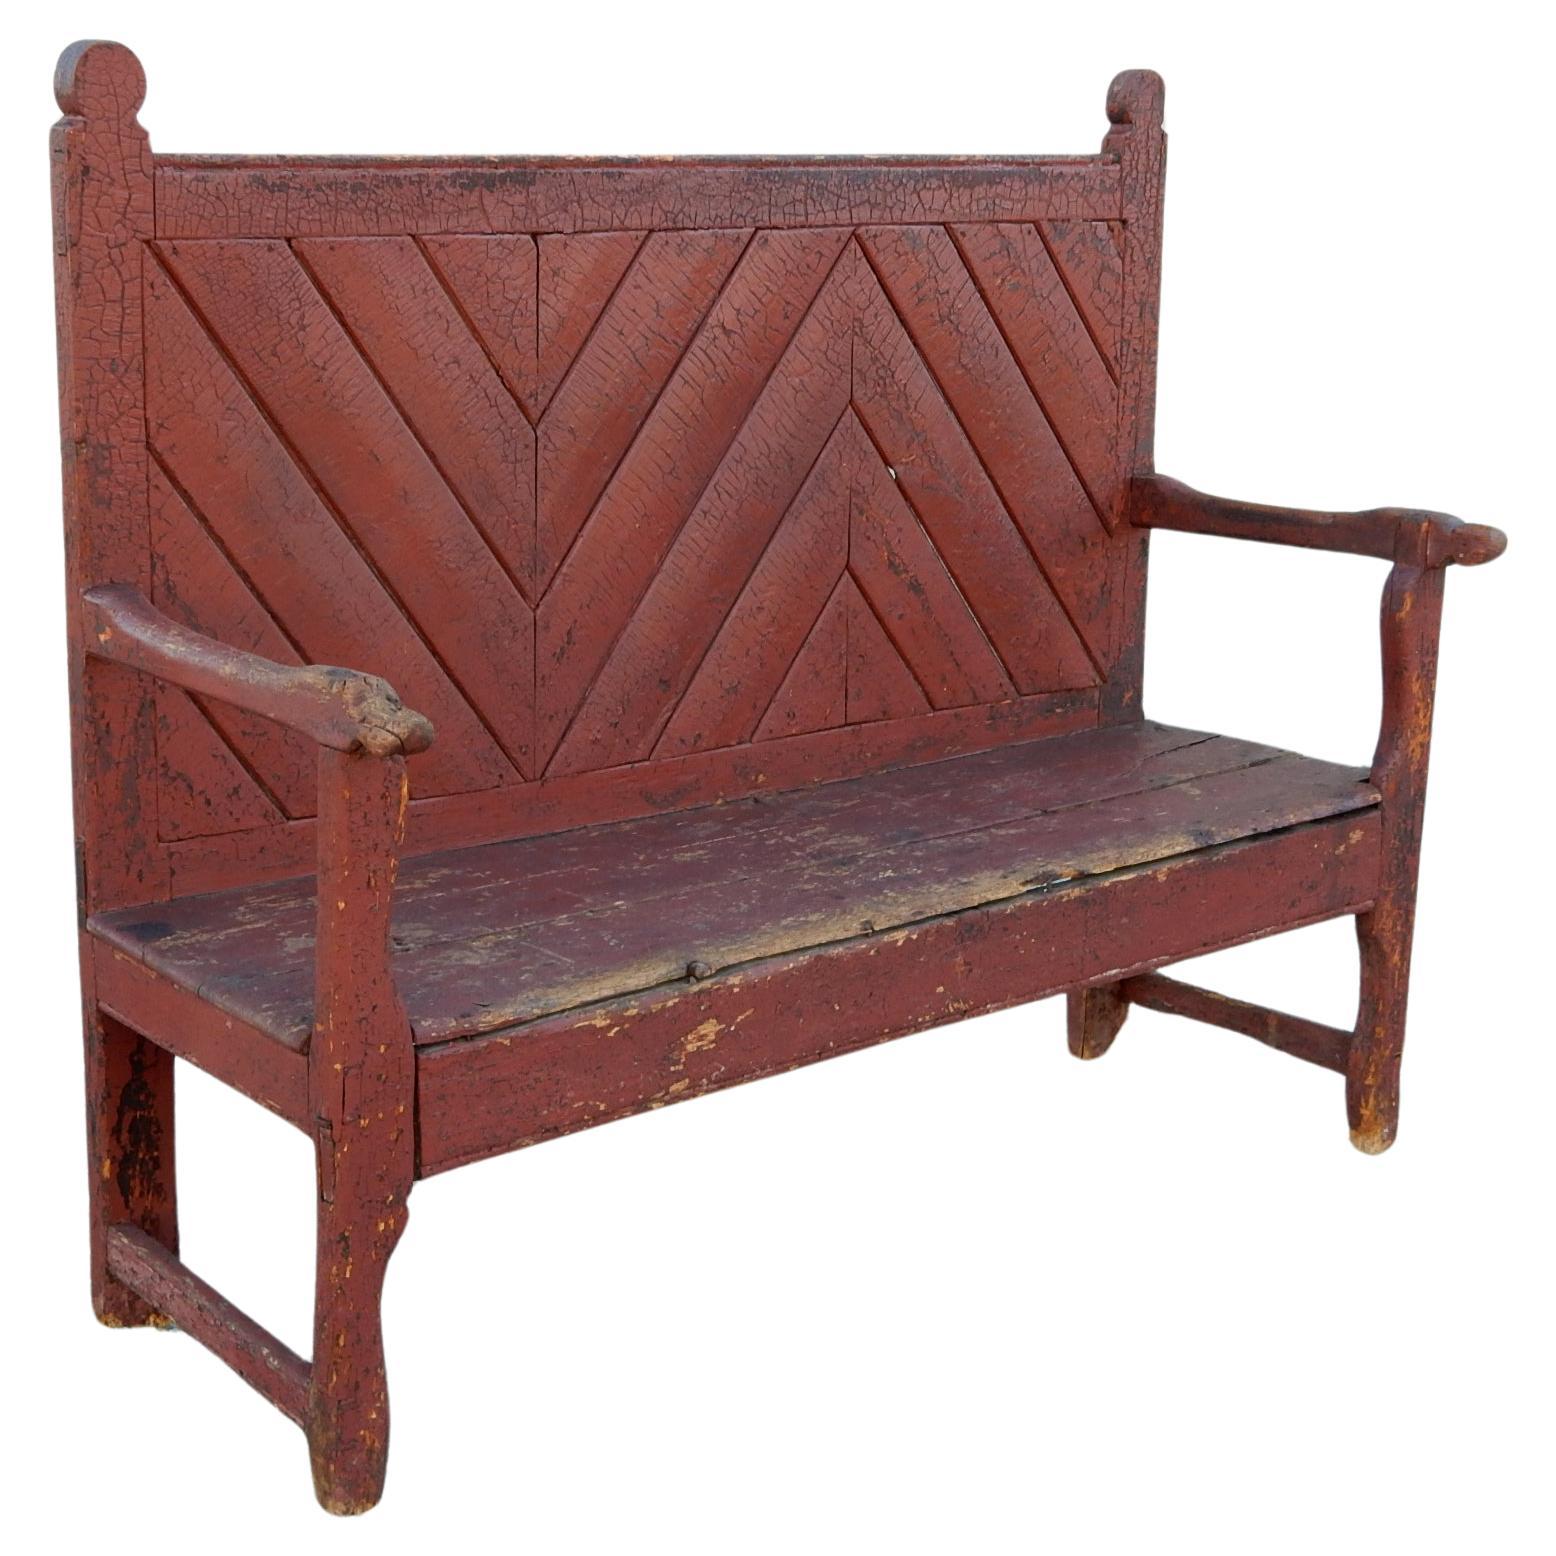 Large 19th Century Spanish Catalan Settee Bench In Distressed Condition For Sale In Las Vegas, NV